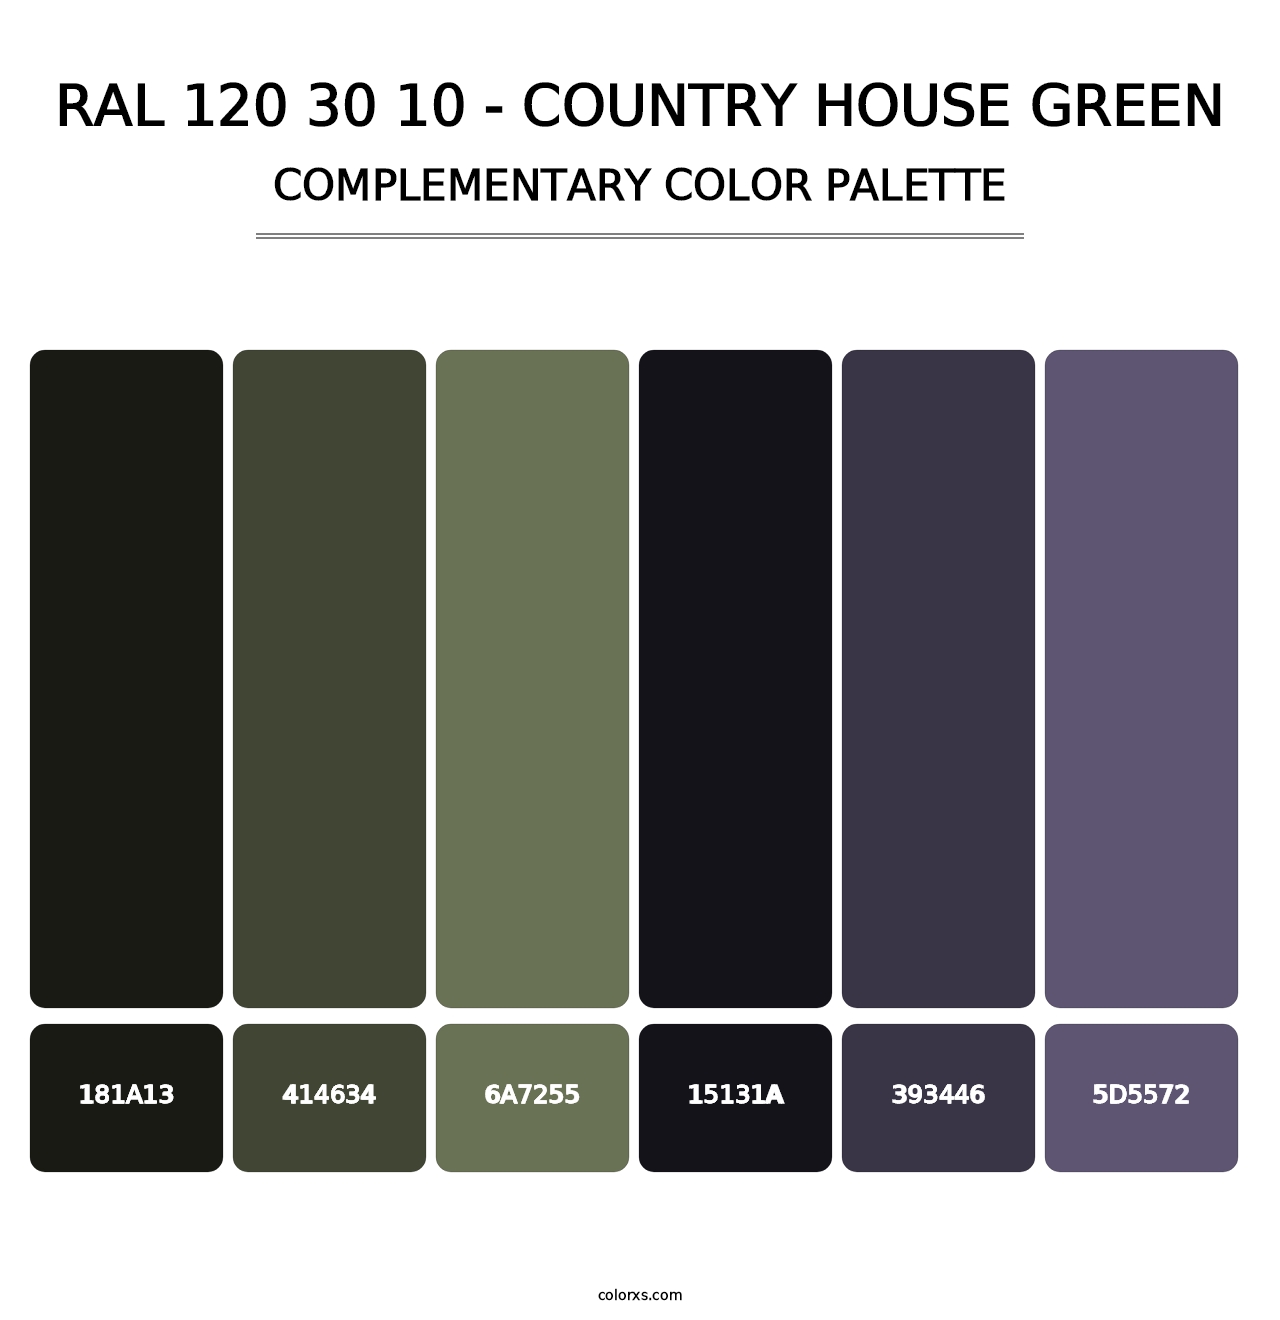 RAL 120 30 10 - Country House Green - Complementary Color Palette